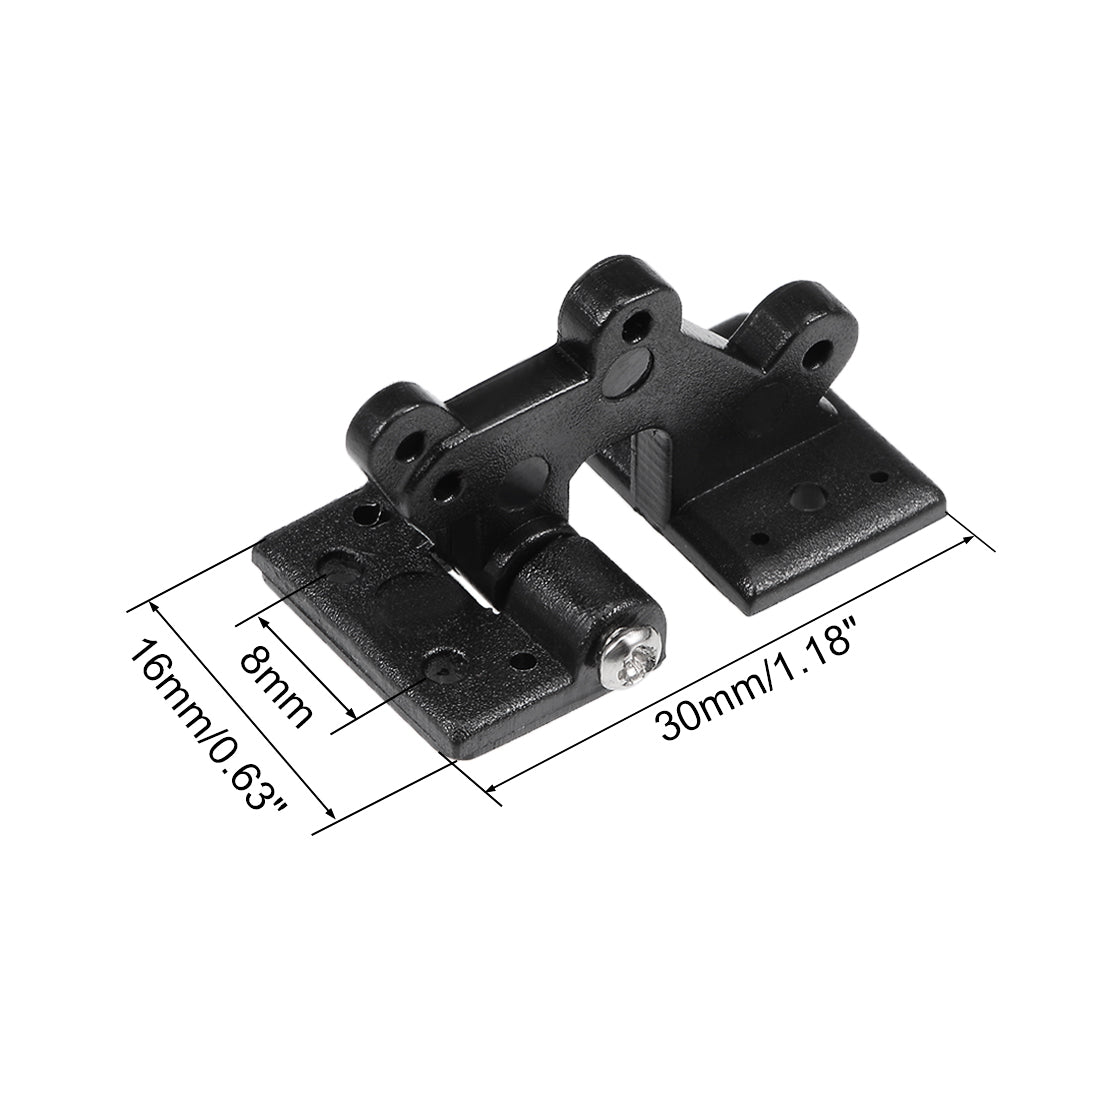 uxcell Uxcell RC Hinges Adjustable Hatch Hinge L30 x W16 mm, for RC Model Airplane Parts Black 6pcs